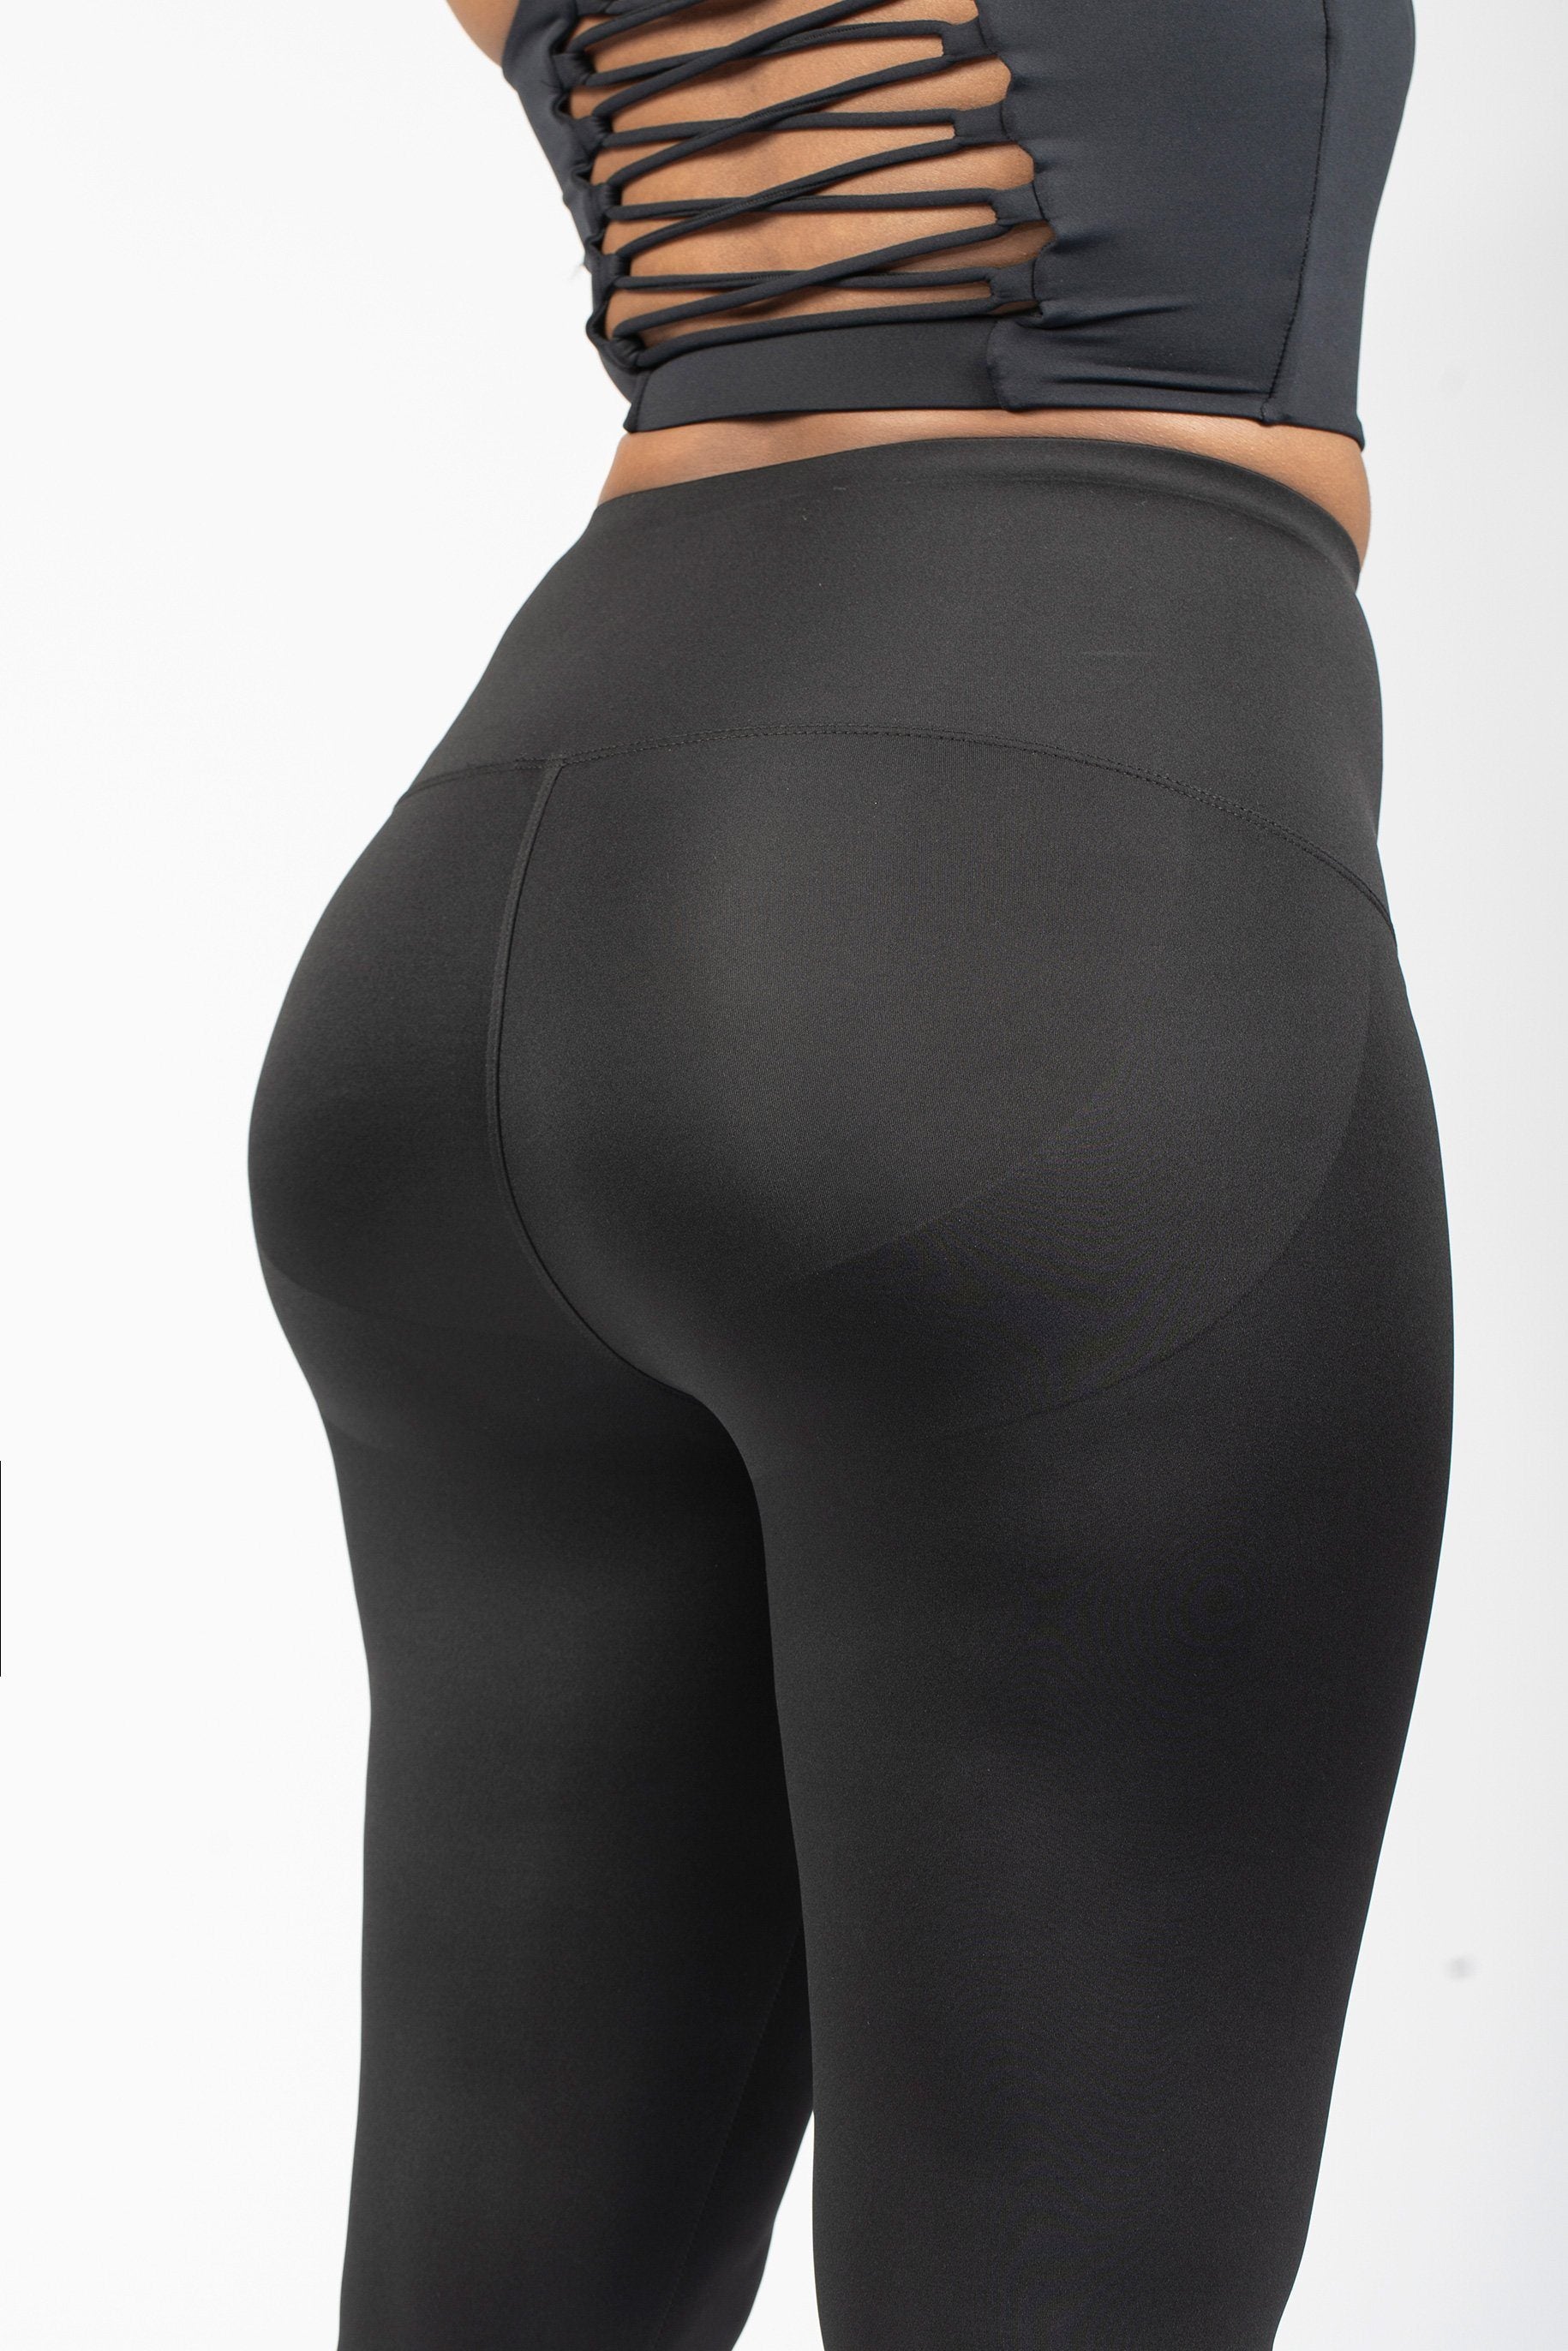 Maidenform Women's Firm Foundations Shapewear Leggings - Available in Tall  DMS085